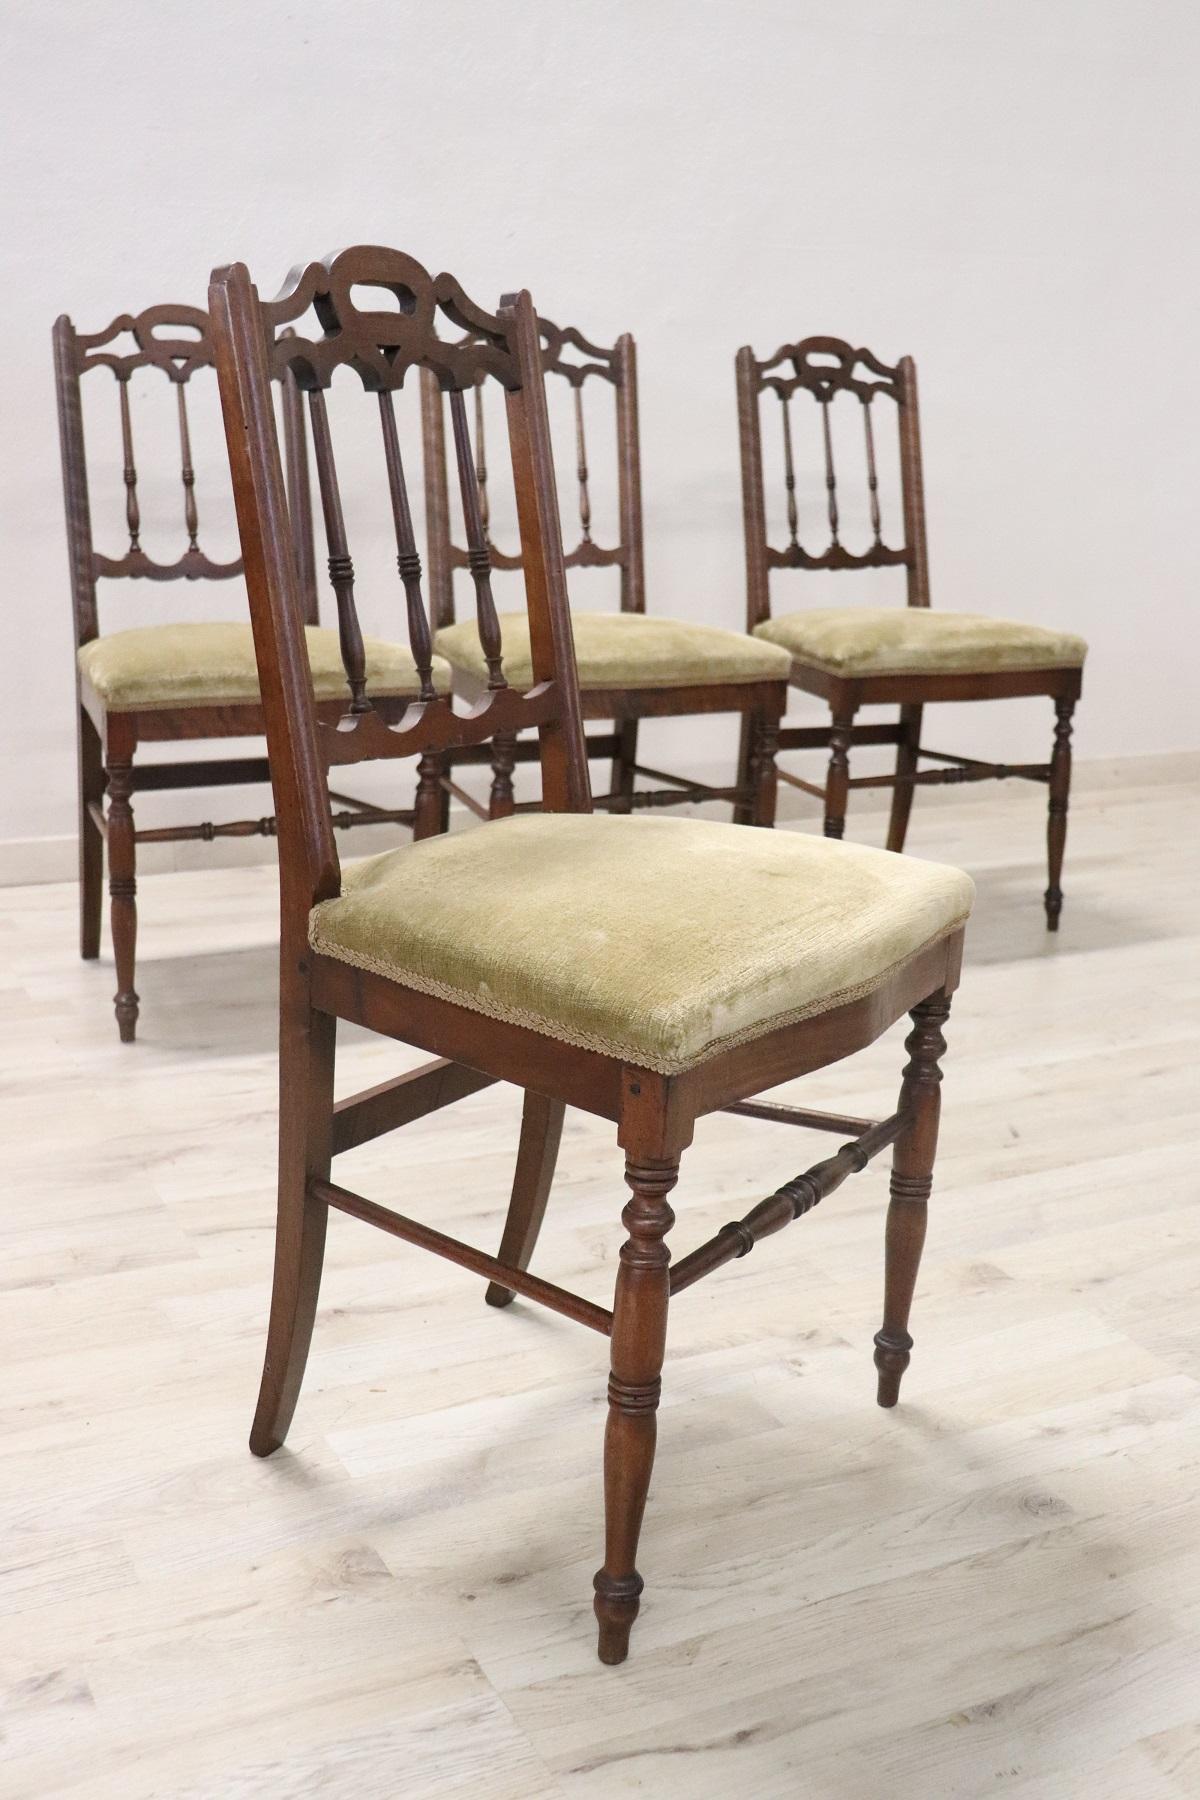 Series of refined Italian four chairs in solid walnut wood. The walnut wood with refined turned decoration in the back and legs. The legs are very elegant. The seat is wide and comfortable with velvet. The chairs are used but good conditions. Please